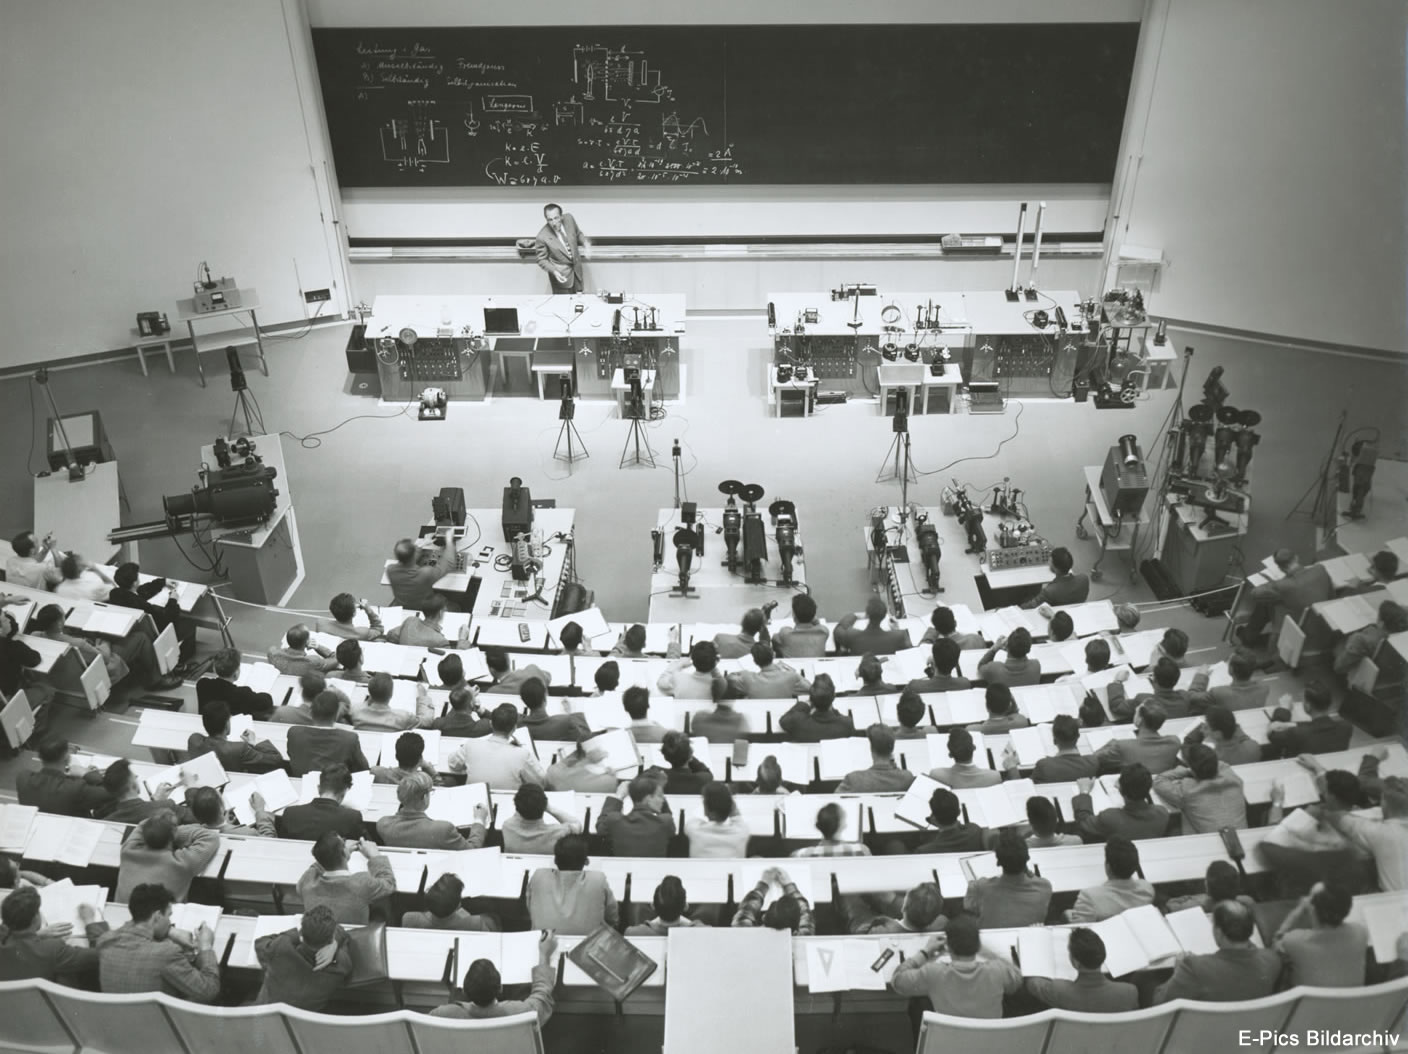 Paul Scherrer’s lecture in the new lecture hall 